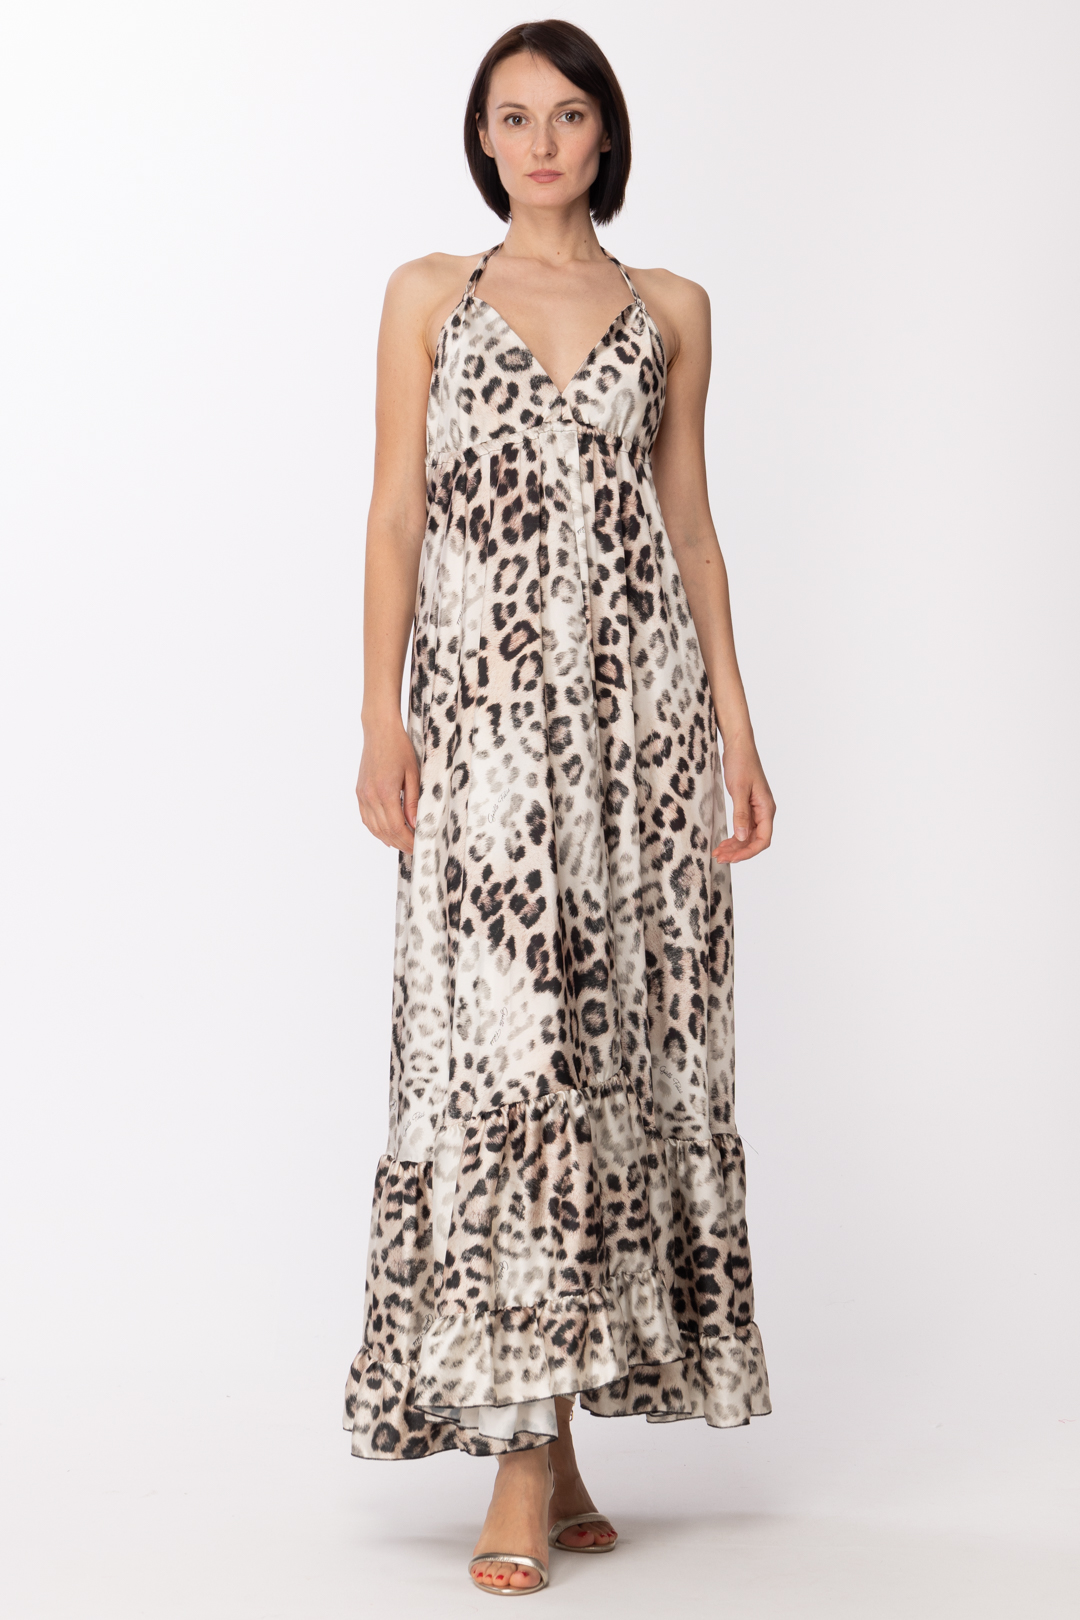 Preview: Gaelle Paris Satin dress with animal print MACULATO BEIGE